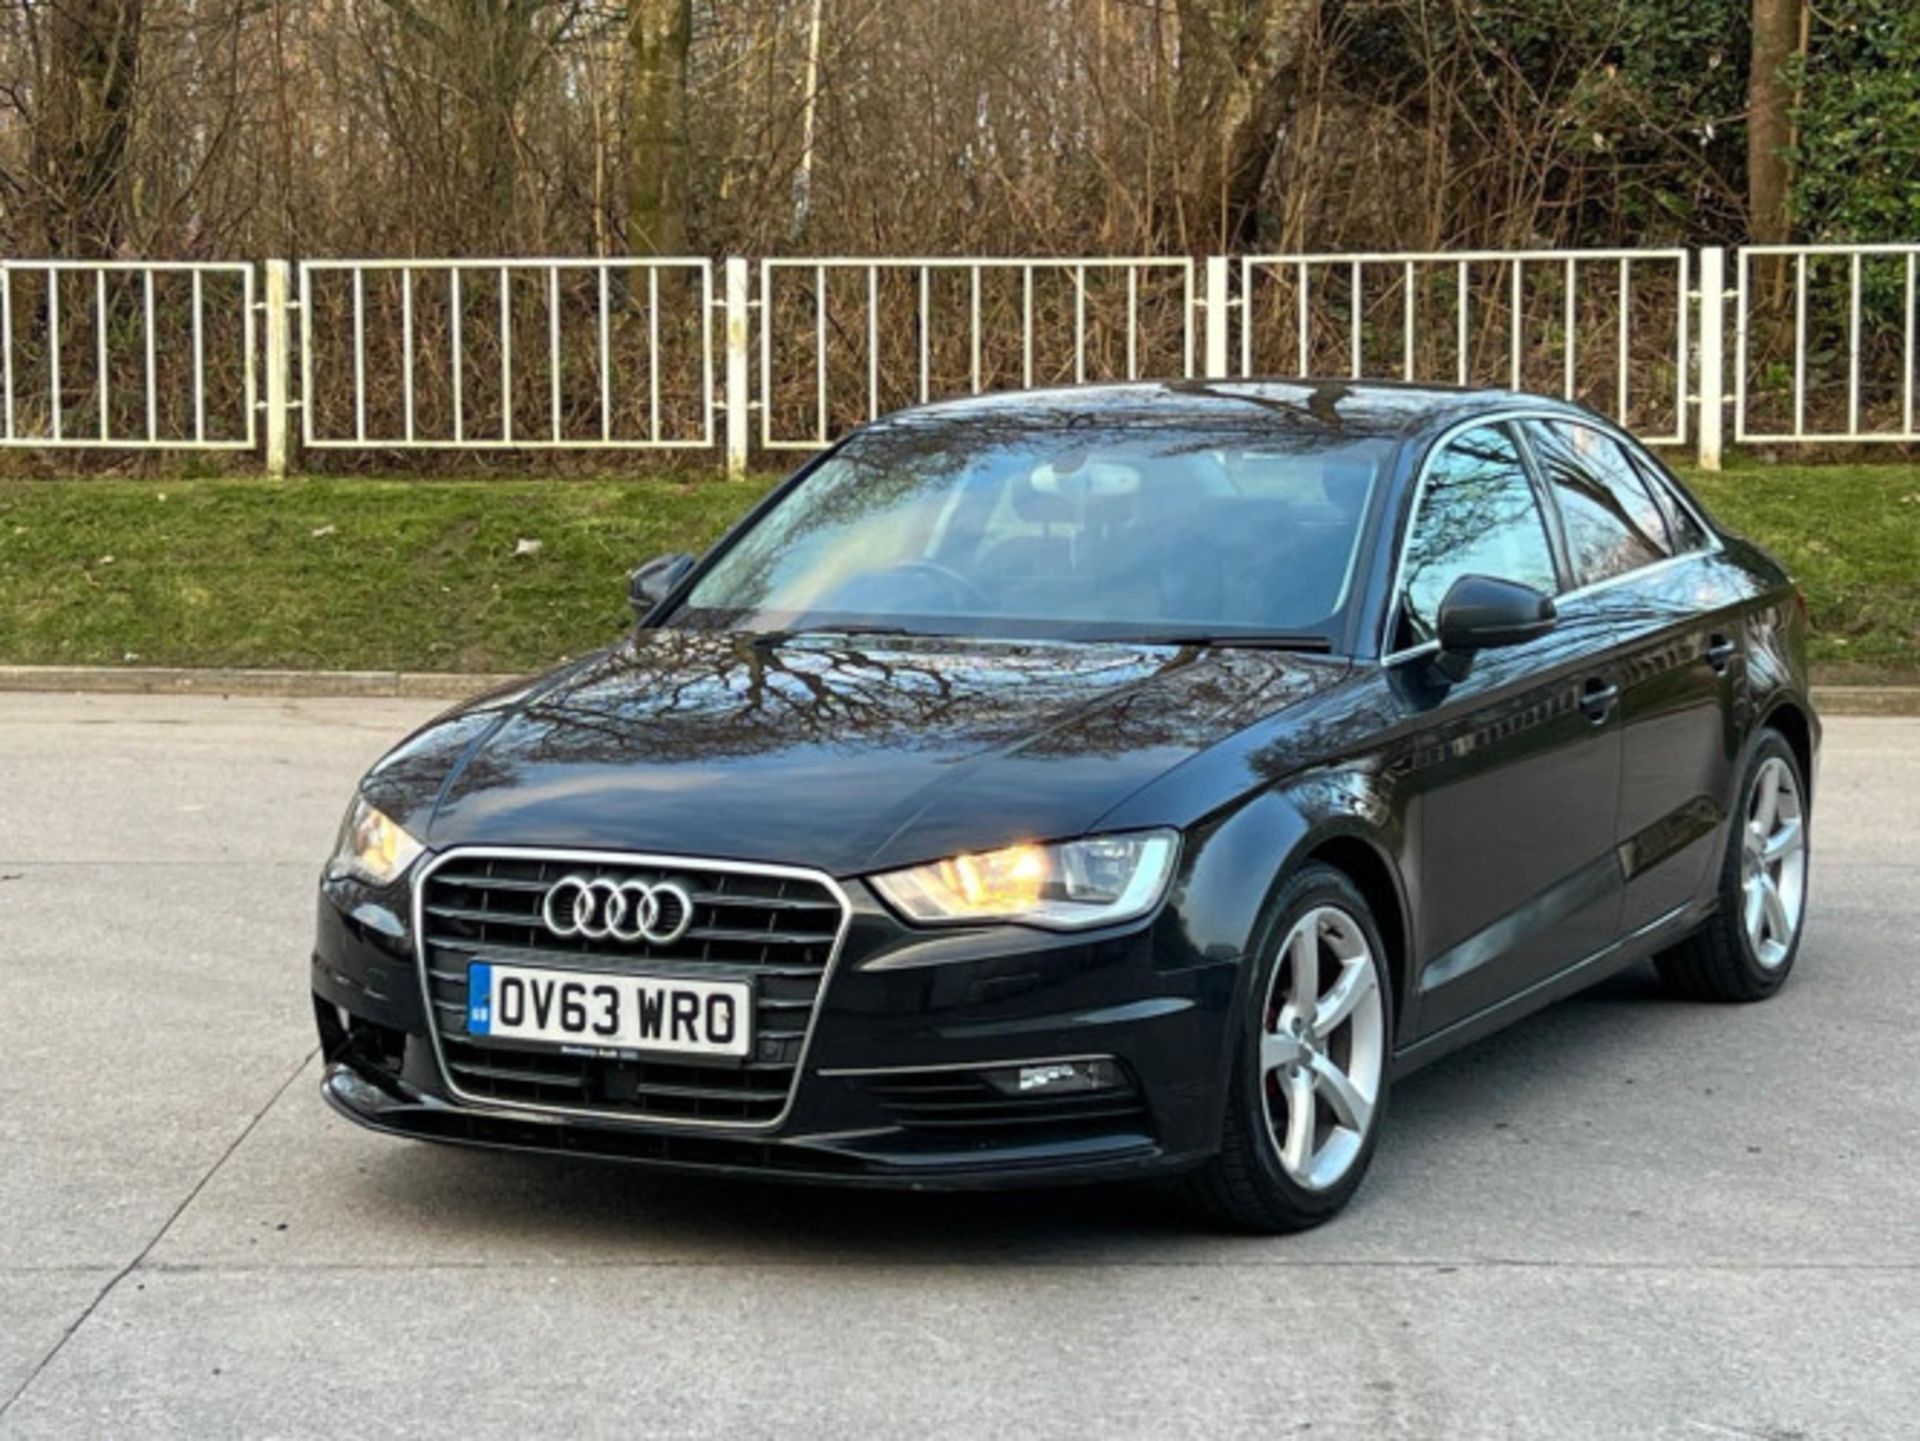 AUDI A3 2.0TDI SPORTBACK - STYLE, PERFORMANCE, AND COMFORT COMBINED >>--NO VAT ON HAMMER--<< - Image 202 of 216